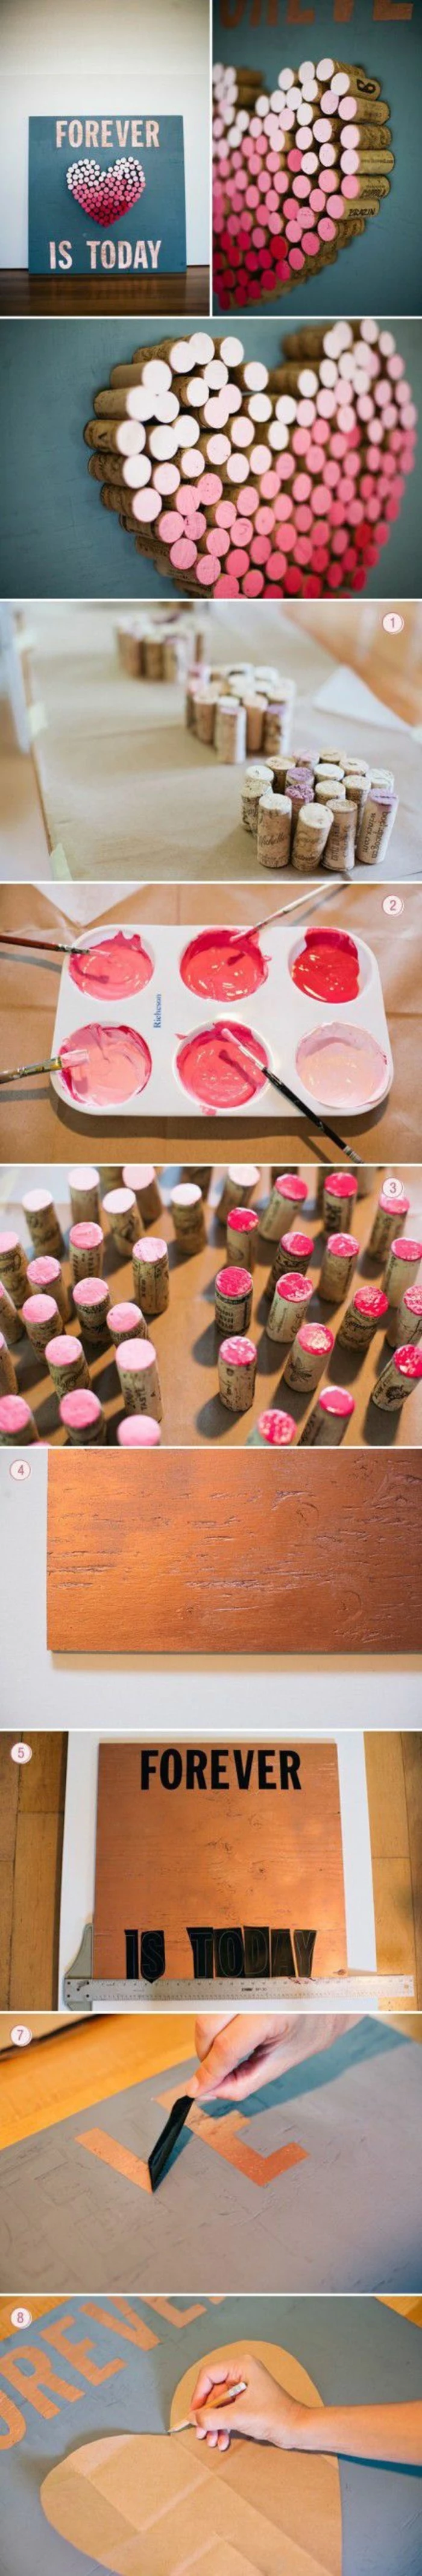 shades of pink paint, corks arranges in the shape of a heart, craft gifts, diy tutorial, step by step